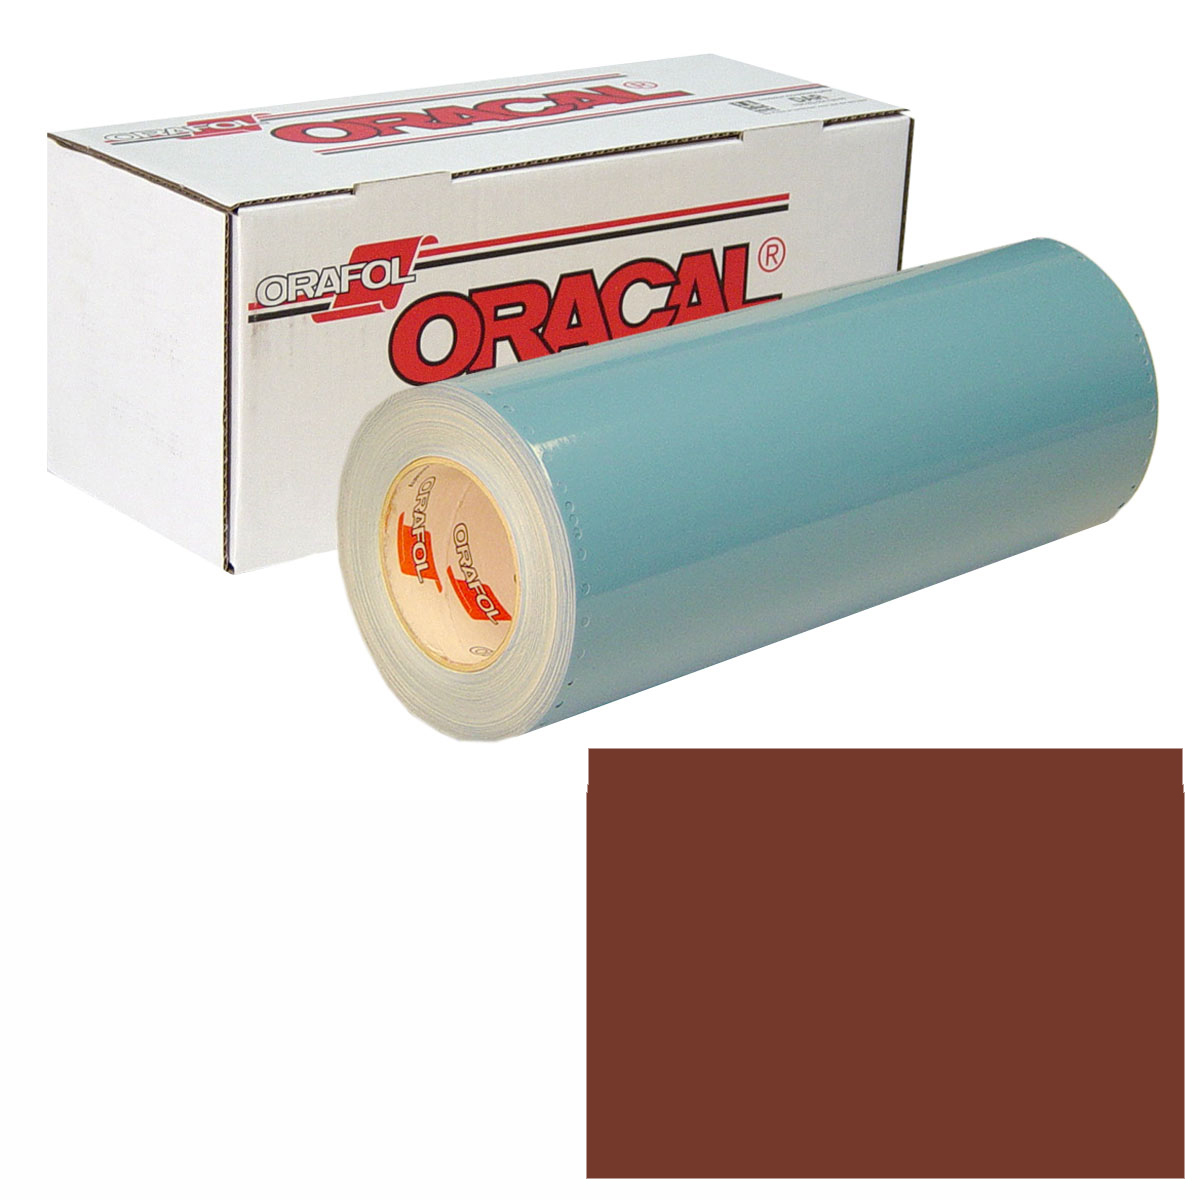 ORACAL 751 15in X 50yd 079 Red Brown